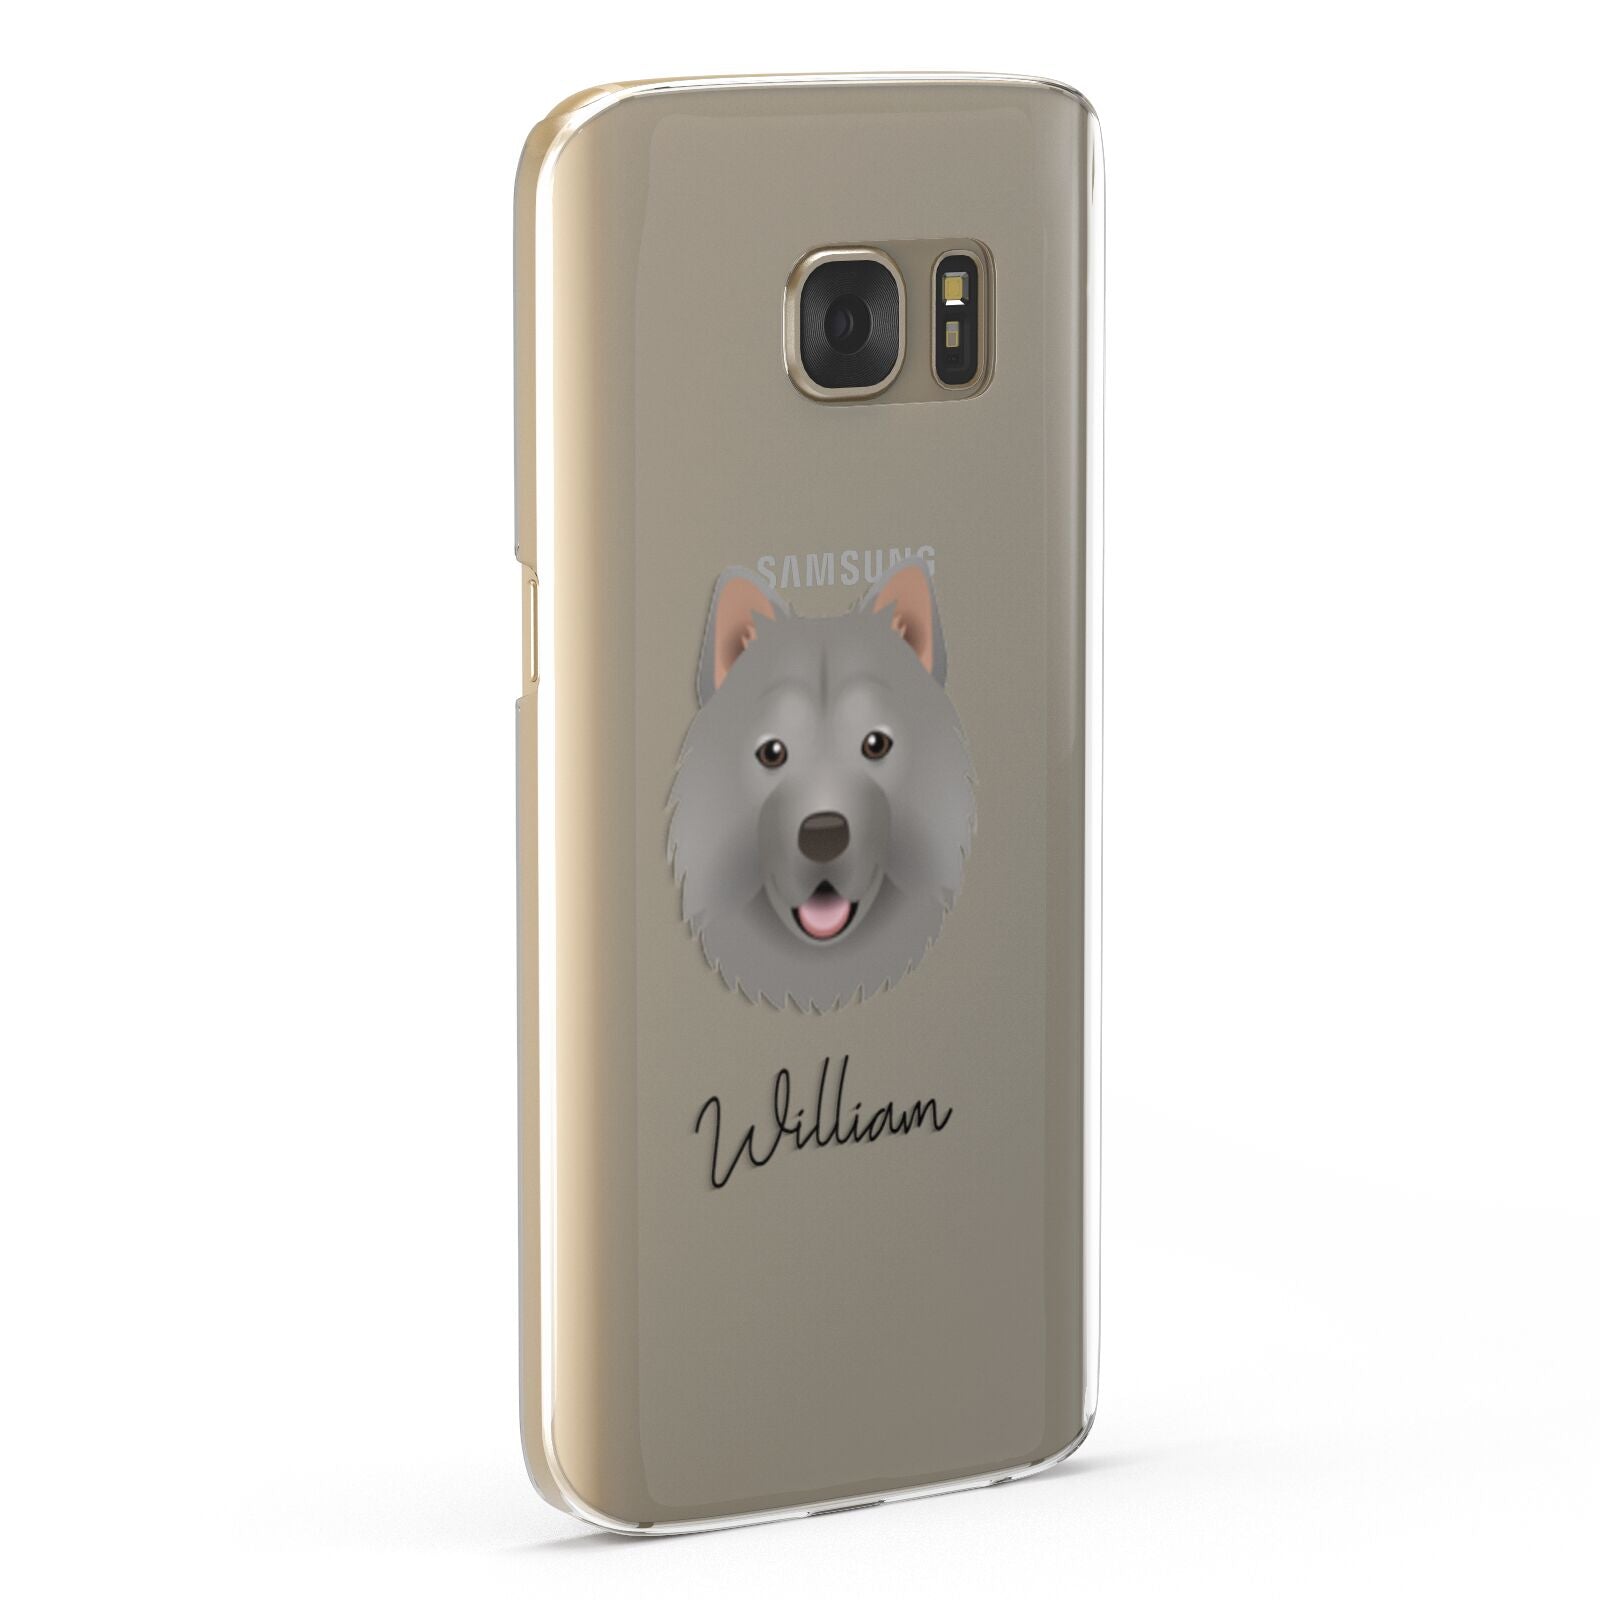 Chusky Personalised Samsung Galaxy Case Fourty Five Degrees